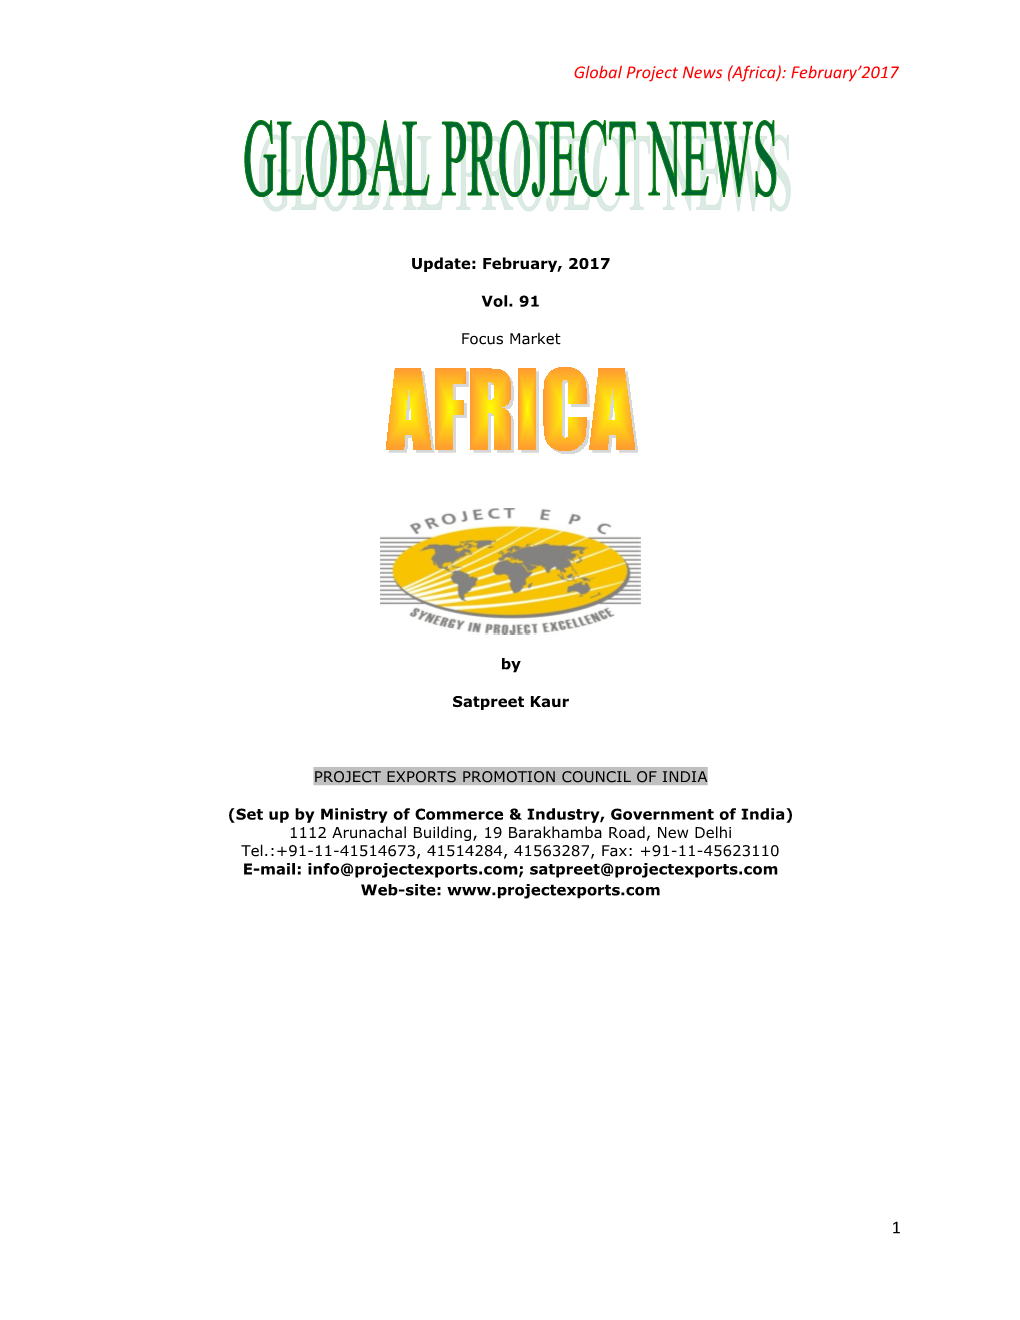 Global Project News (Africa): February 2017